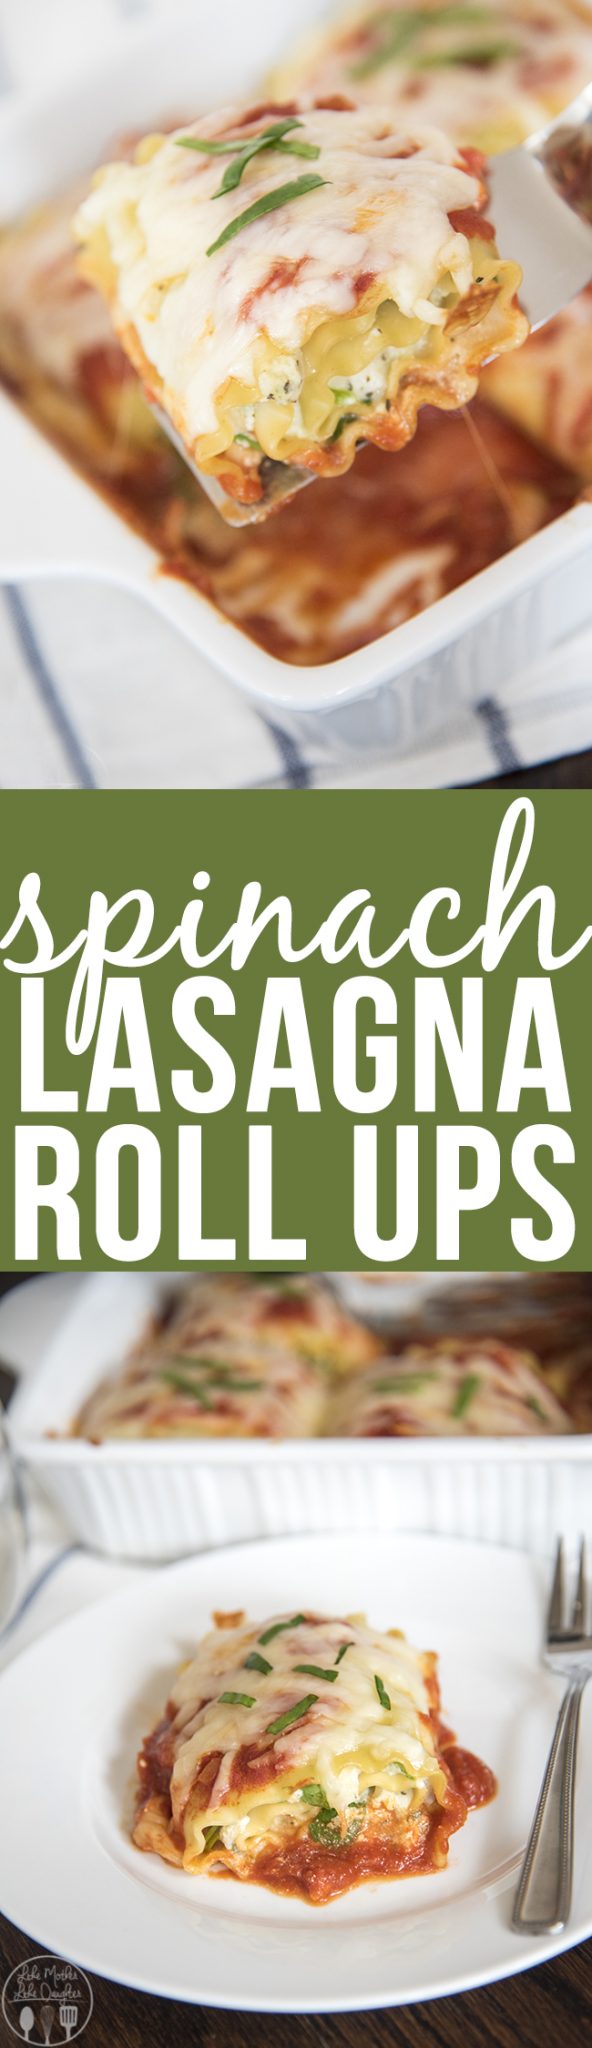 Spinach Lasagna Roll Ups - Like Mother Like Daughter